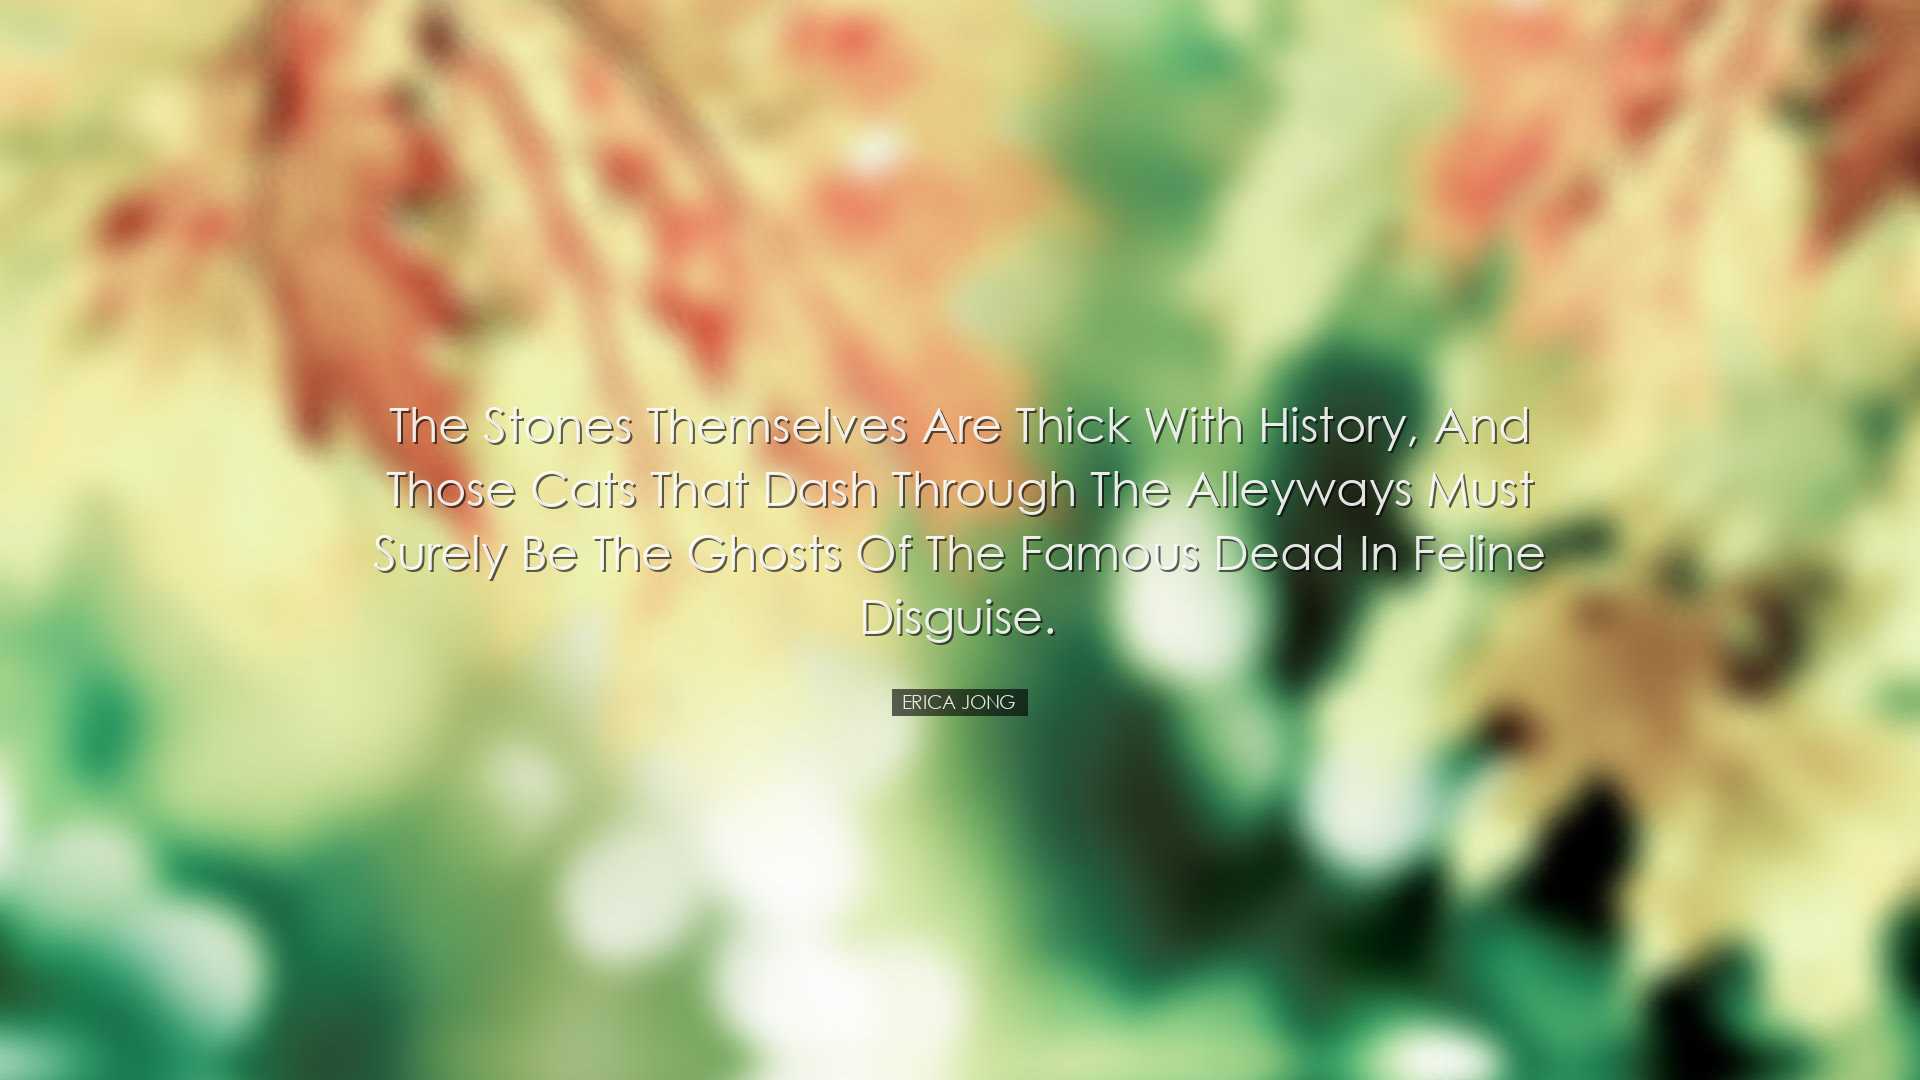 The stones themselves are thick with history, and those cats that